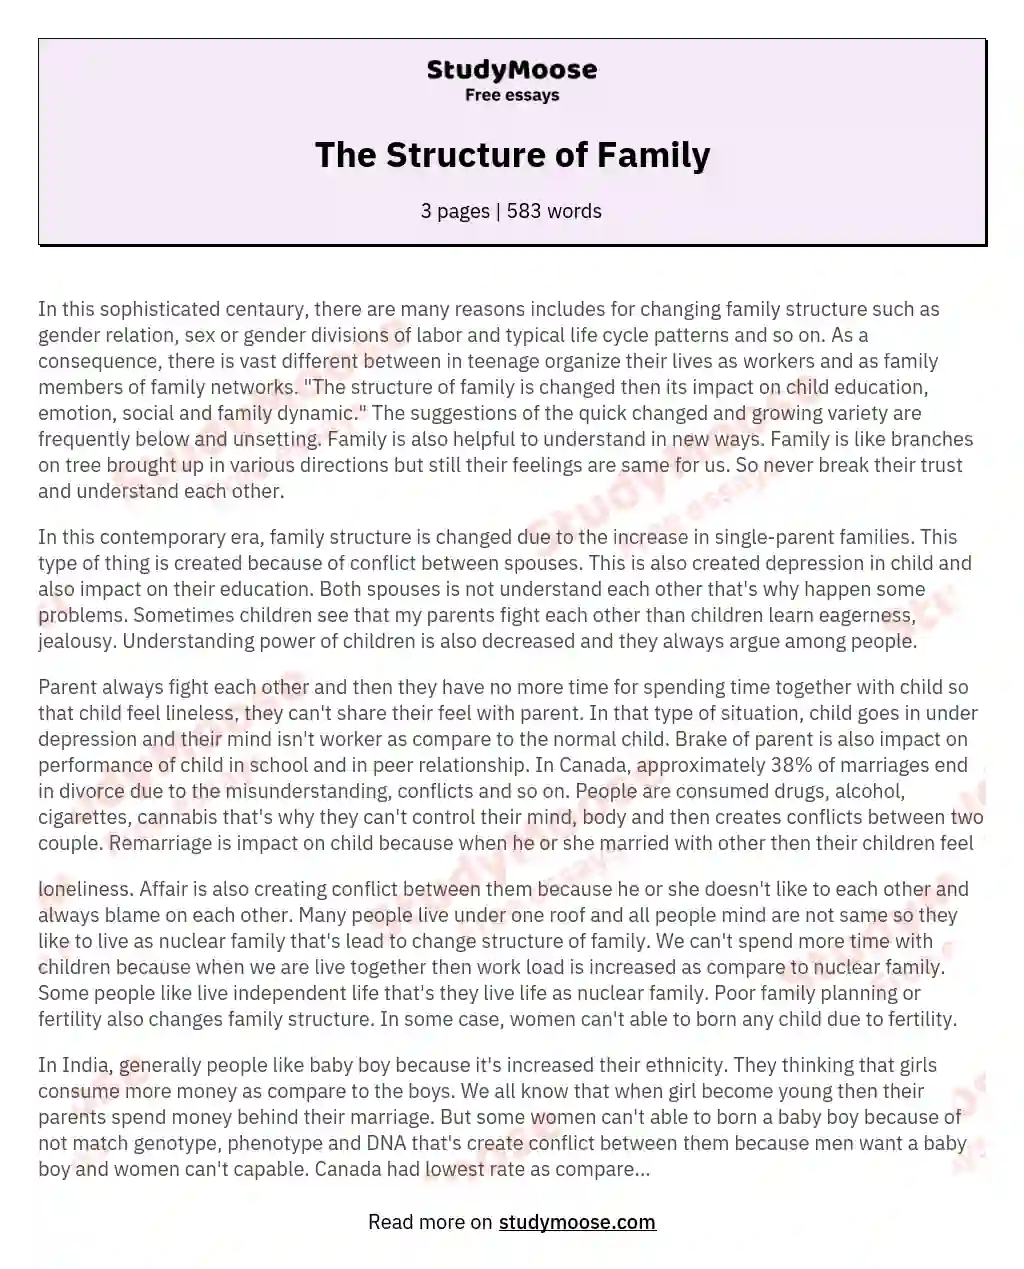 The Structure of Family